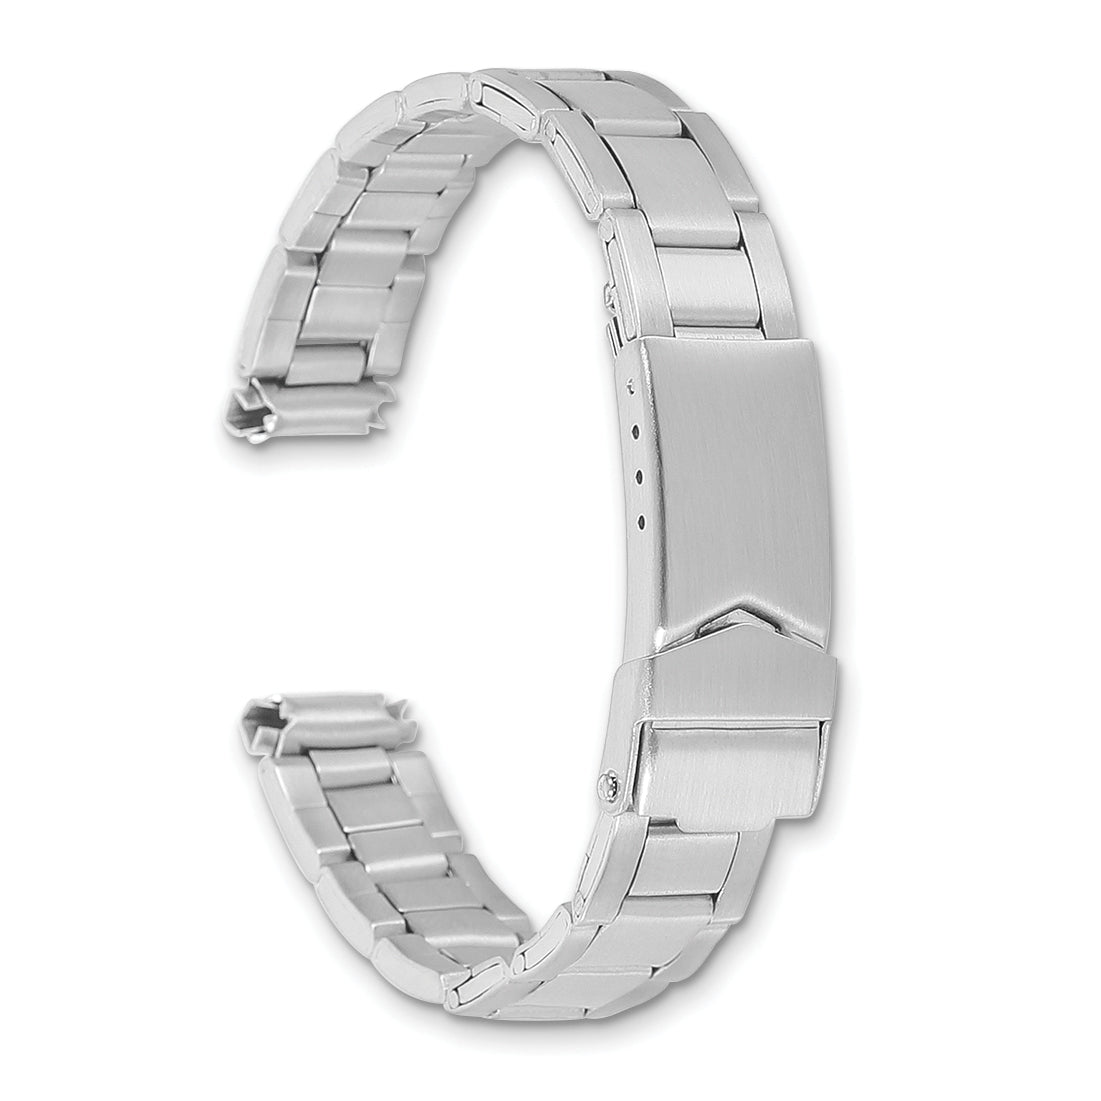 11-14mm Ladies Satin Stainless Steel Oyster-Style with Deployment Buckle 6.75 inch Watch Band